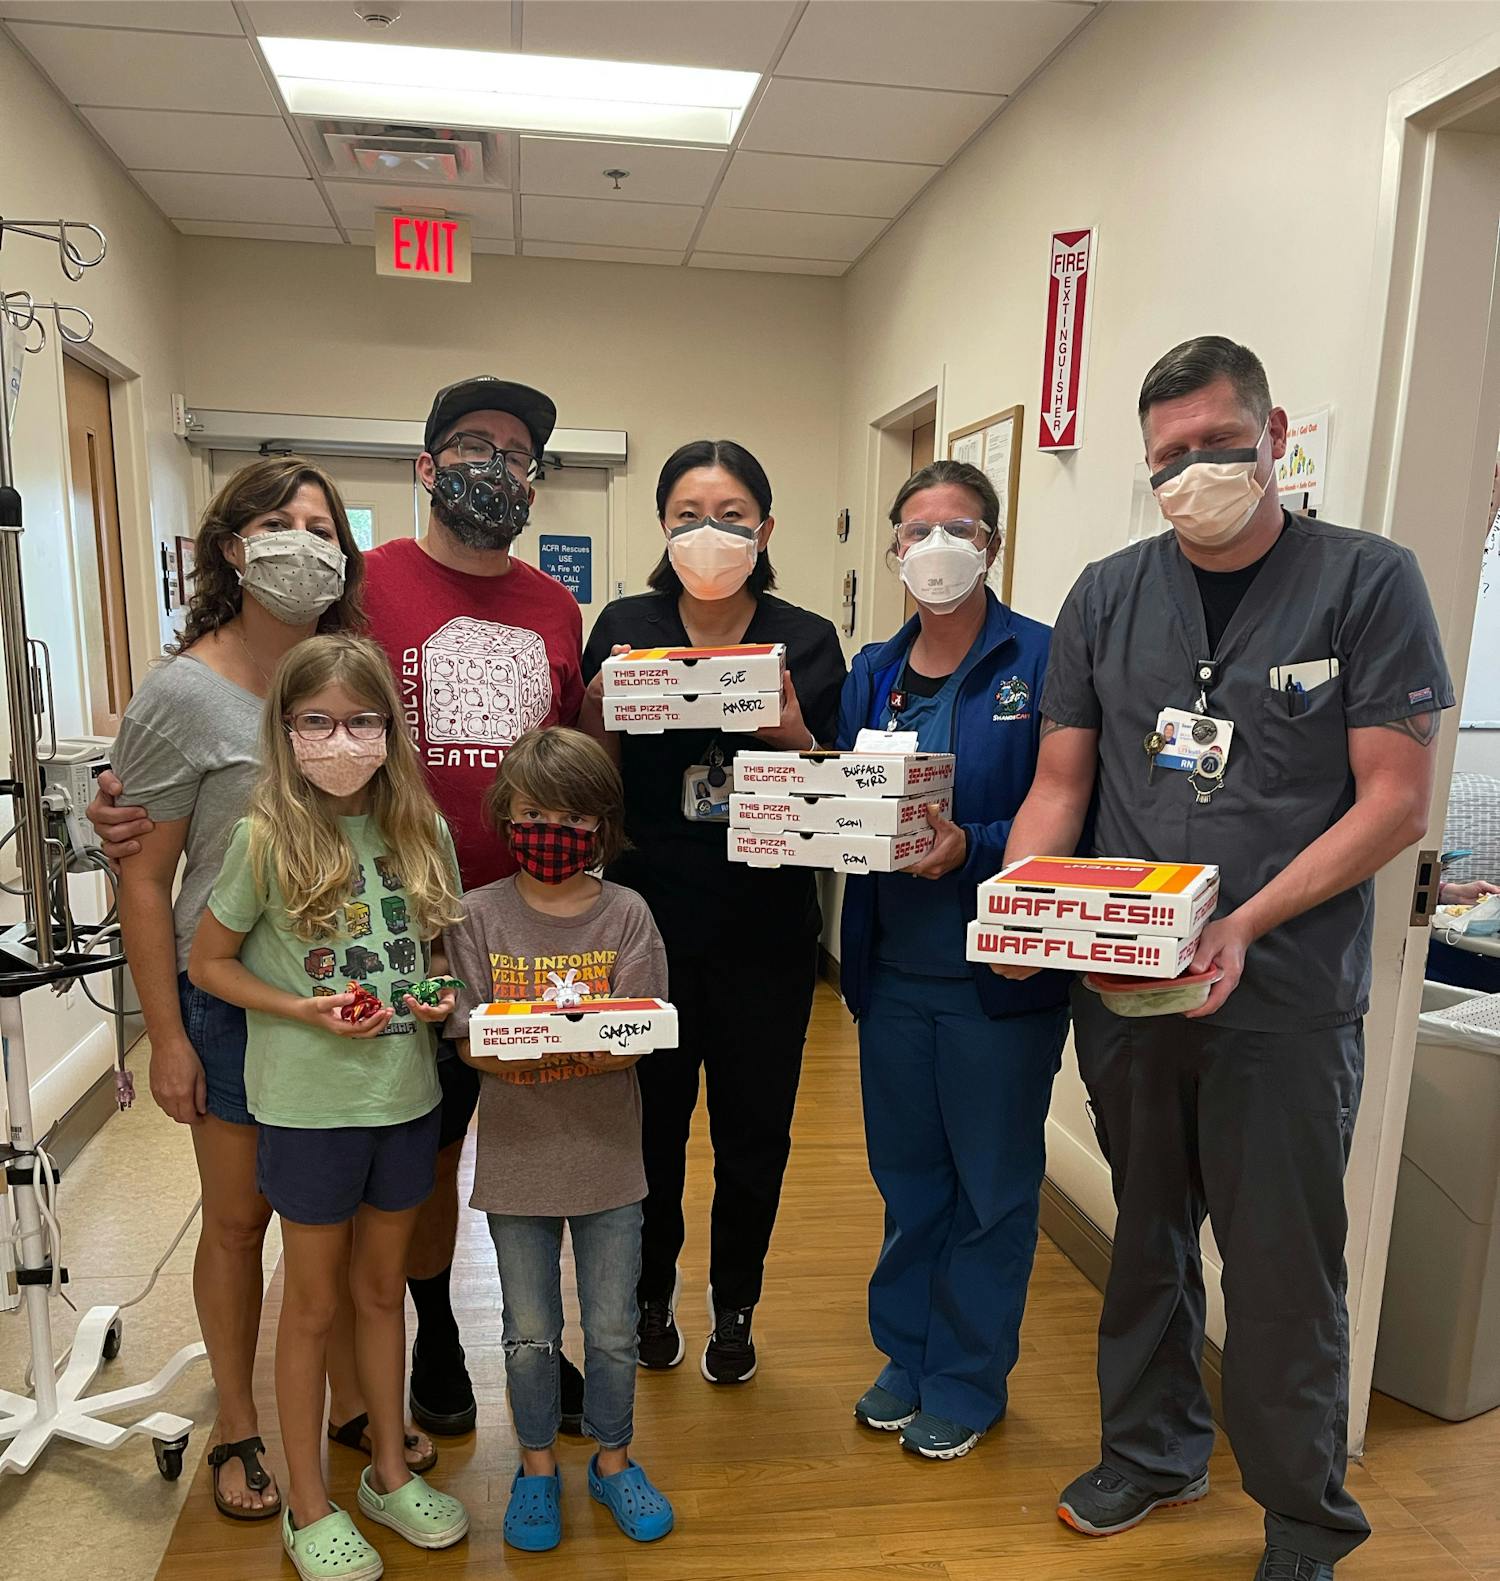 As part of their community outreach efforts, Satch² is donating pizzas to local hospitals to give back to healthcare workers.